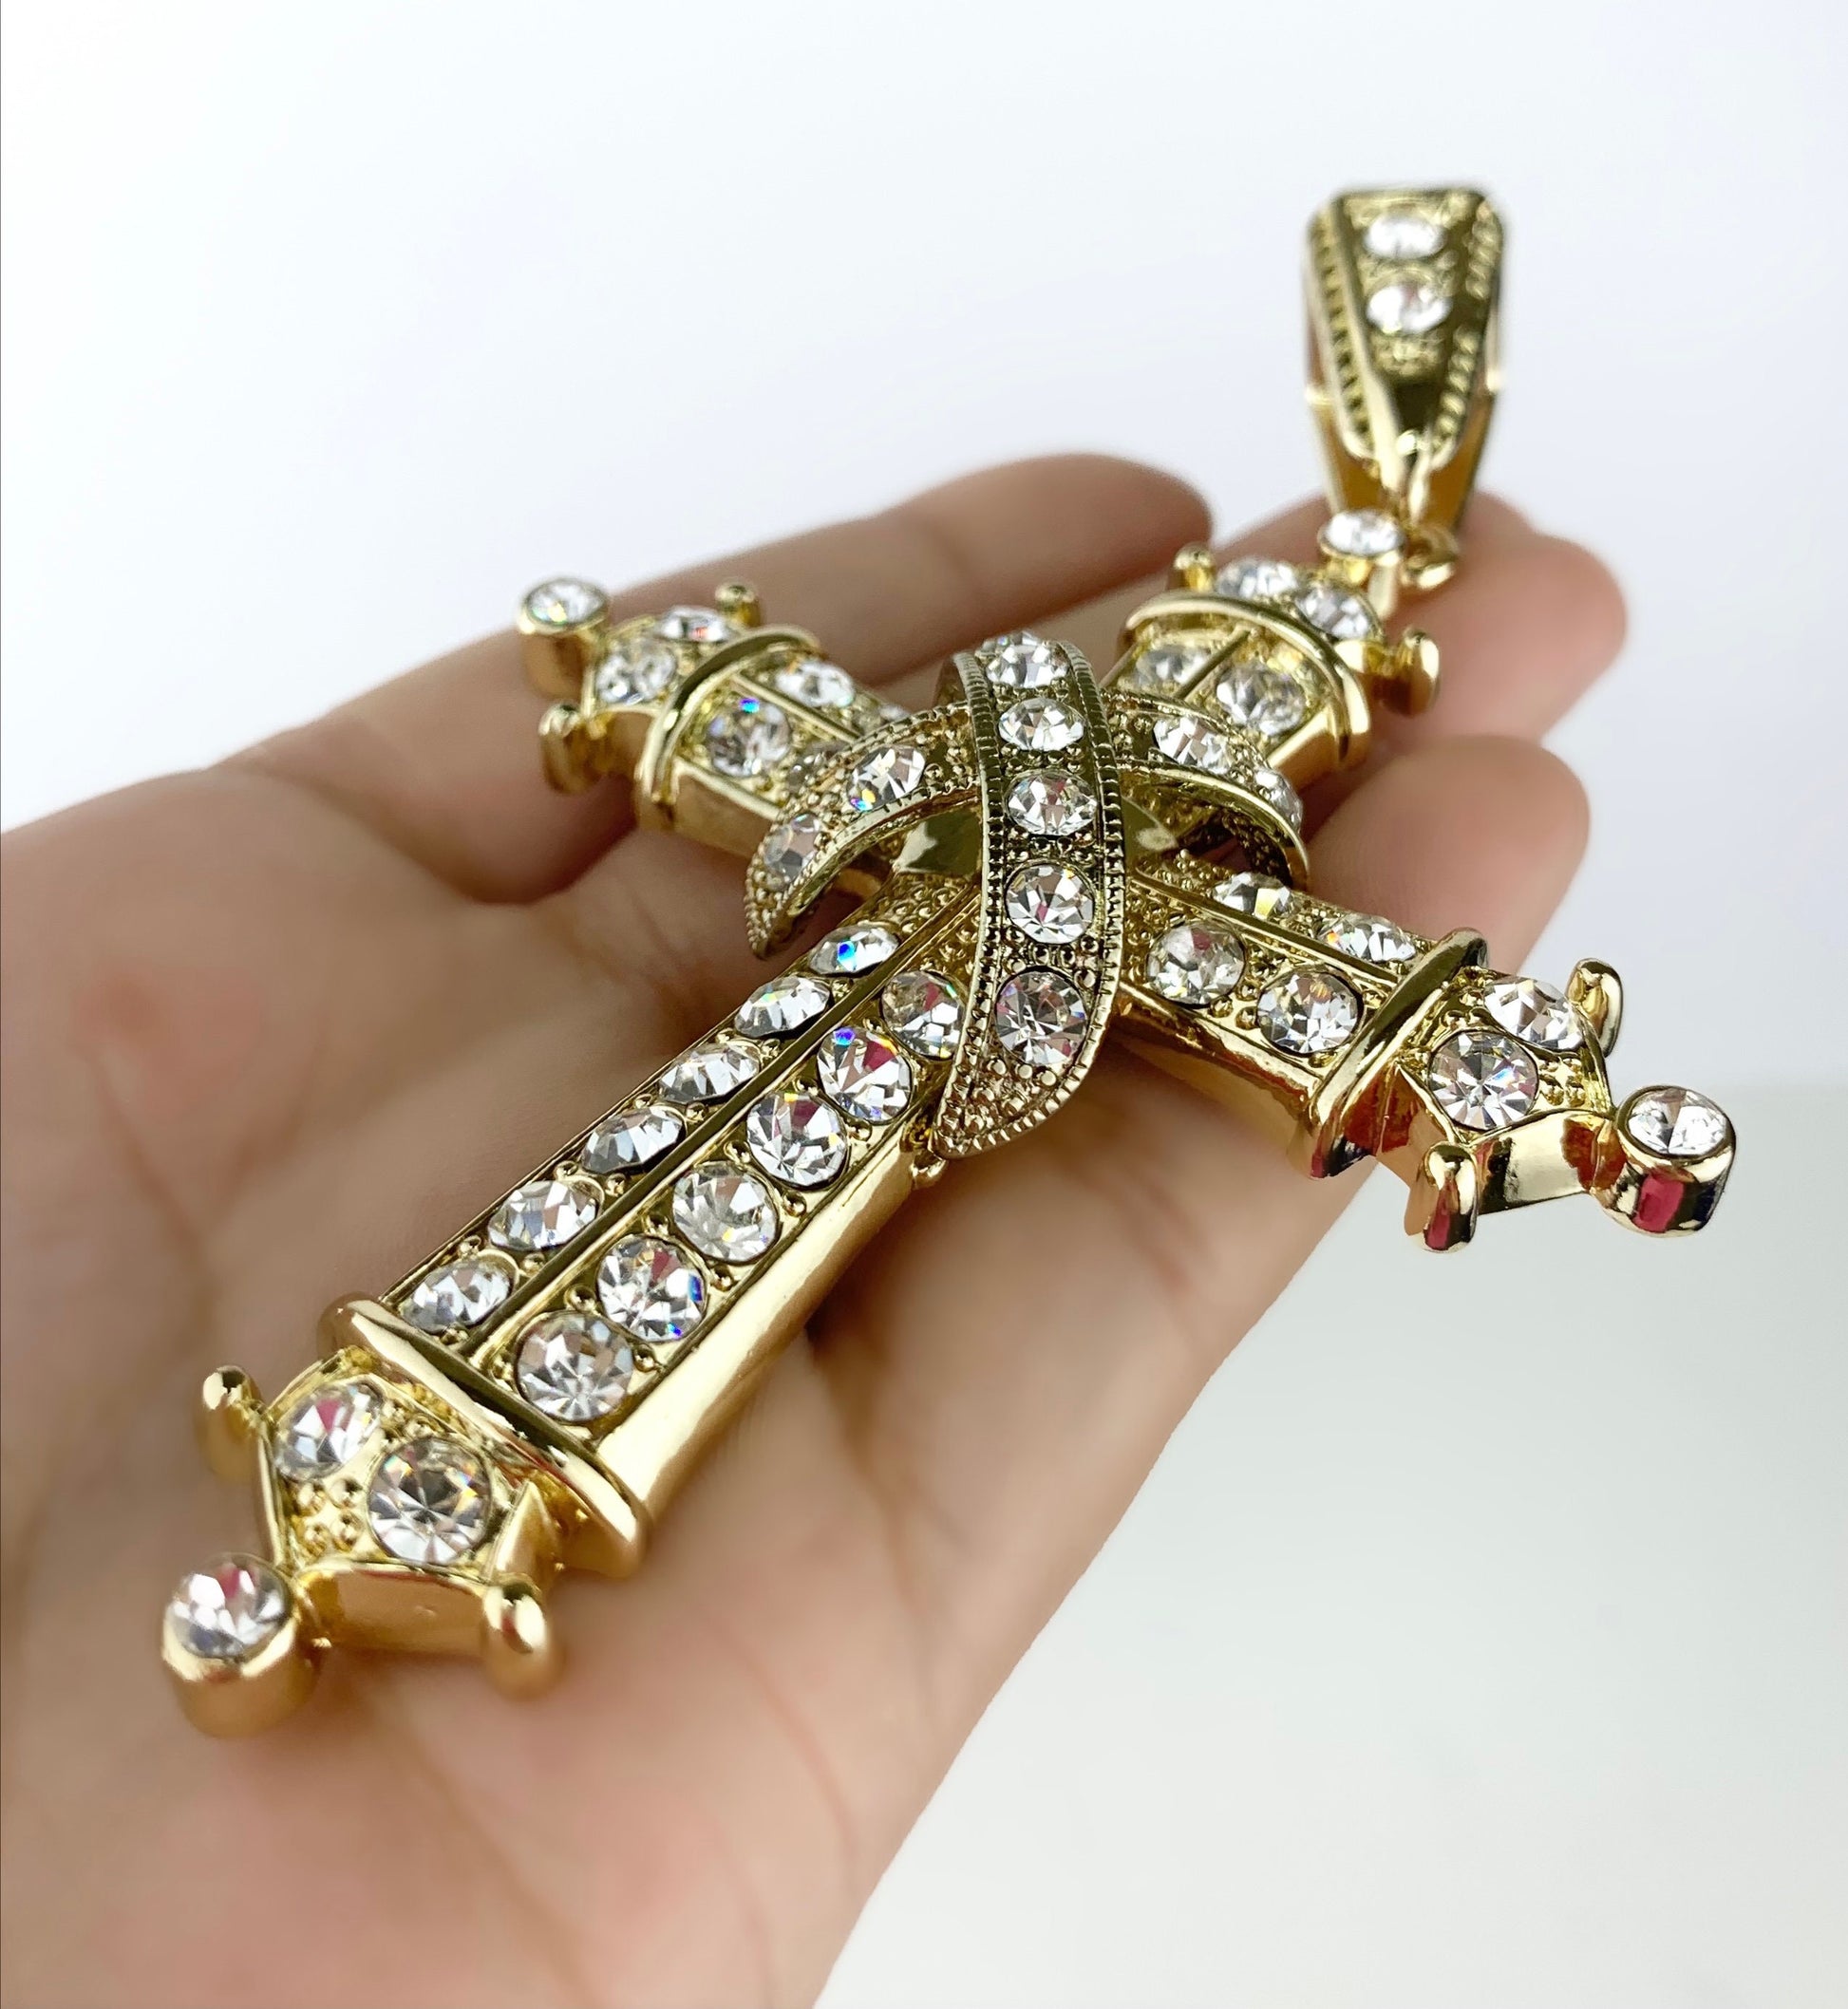 18k Gold Filled Big Bling Square Cross Wholesale Jewelry Supplies